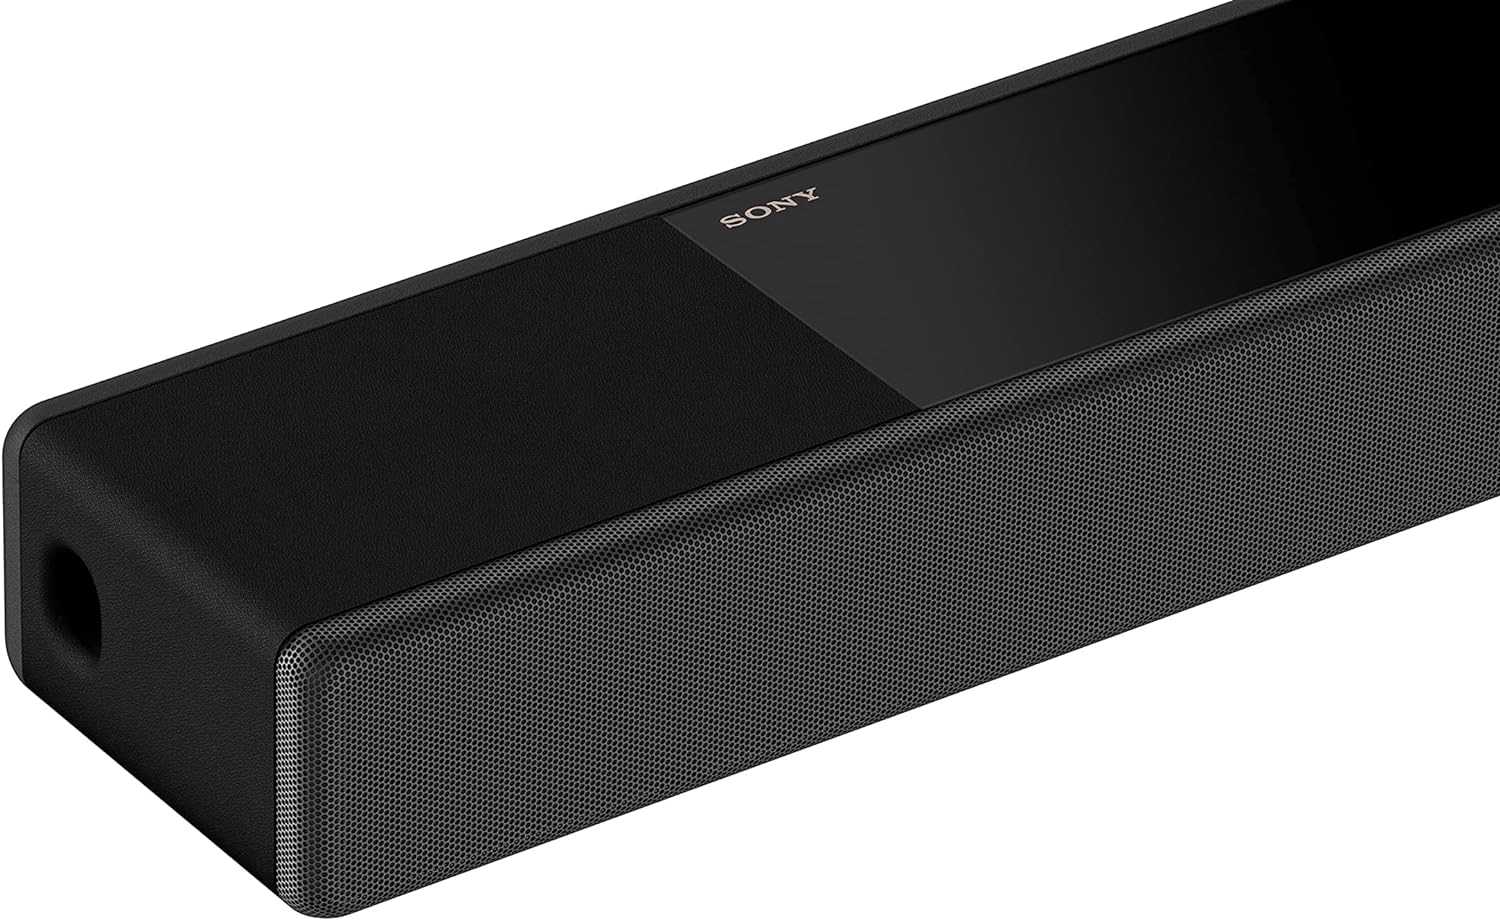 Soundbar Deals - Sony HT-A7000 7.1.2ch 500W Dolby Atmos Sound Bar Surround Sound Home Theater with DTS:X and 360 Spatial Sound Mapping